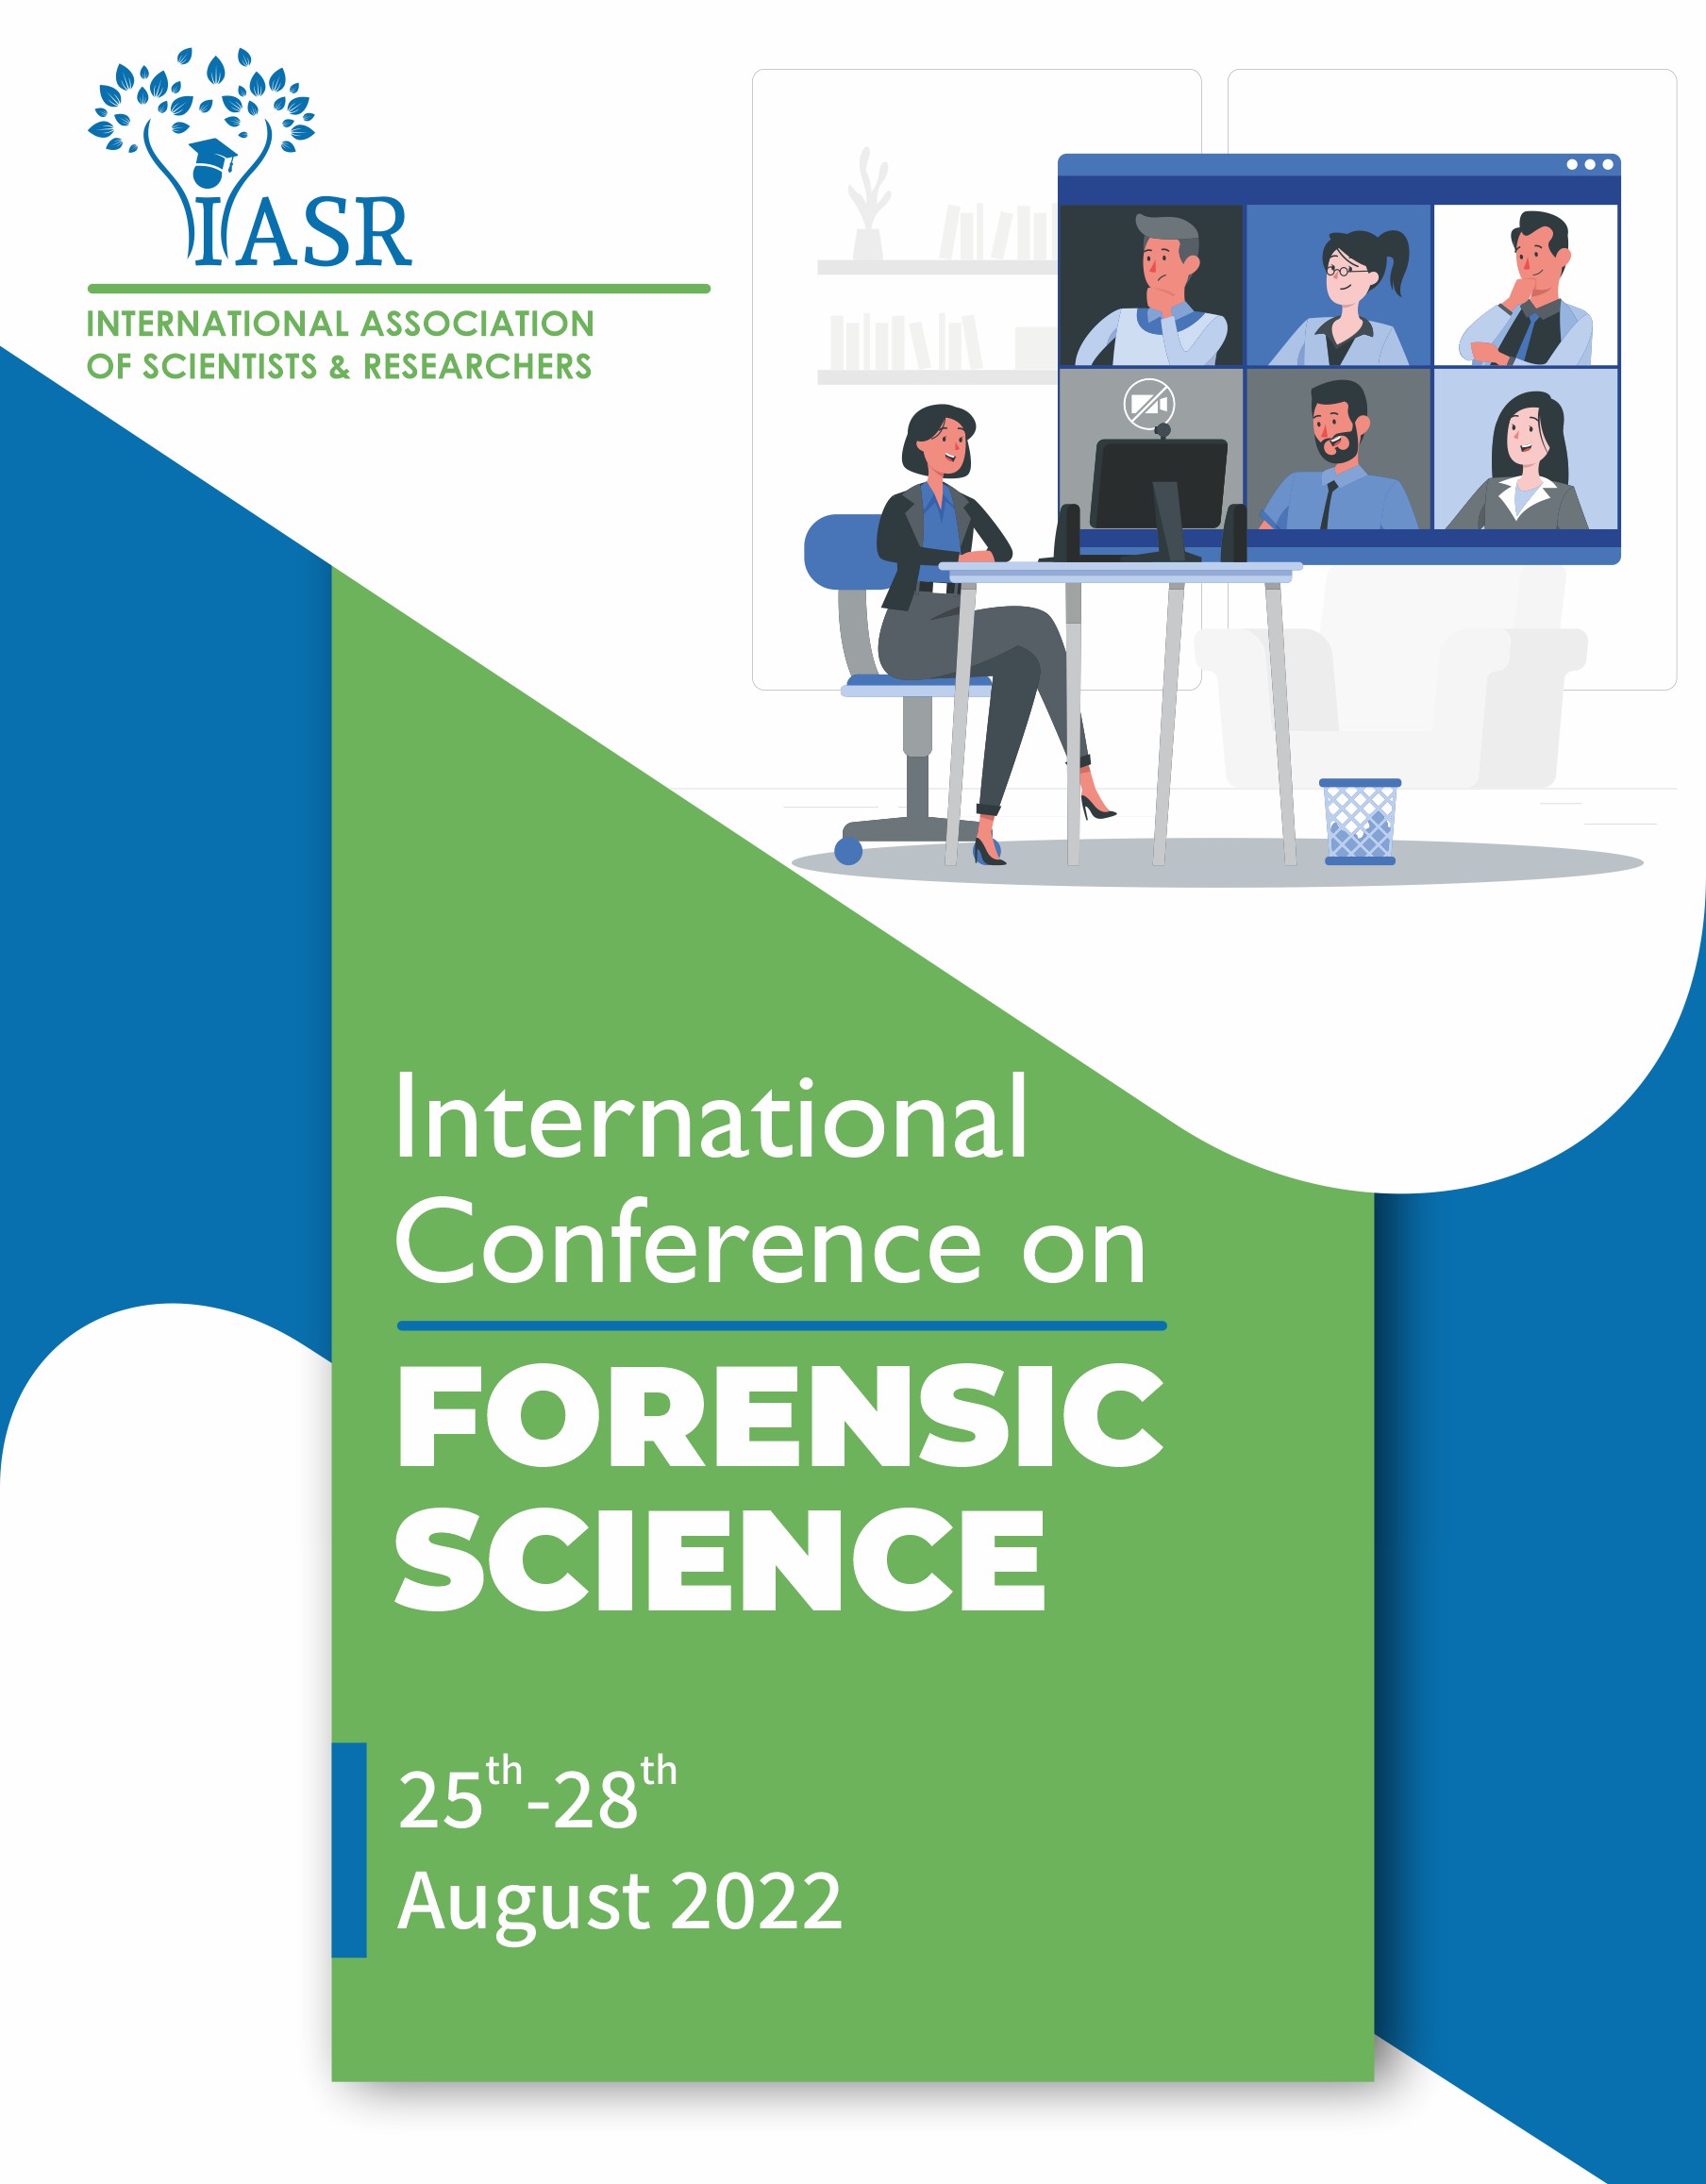 13th IASR International Conference on Forensic Science